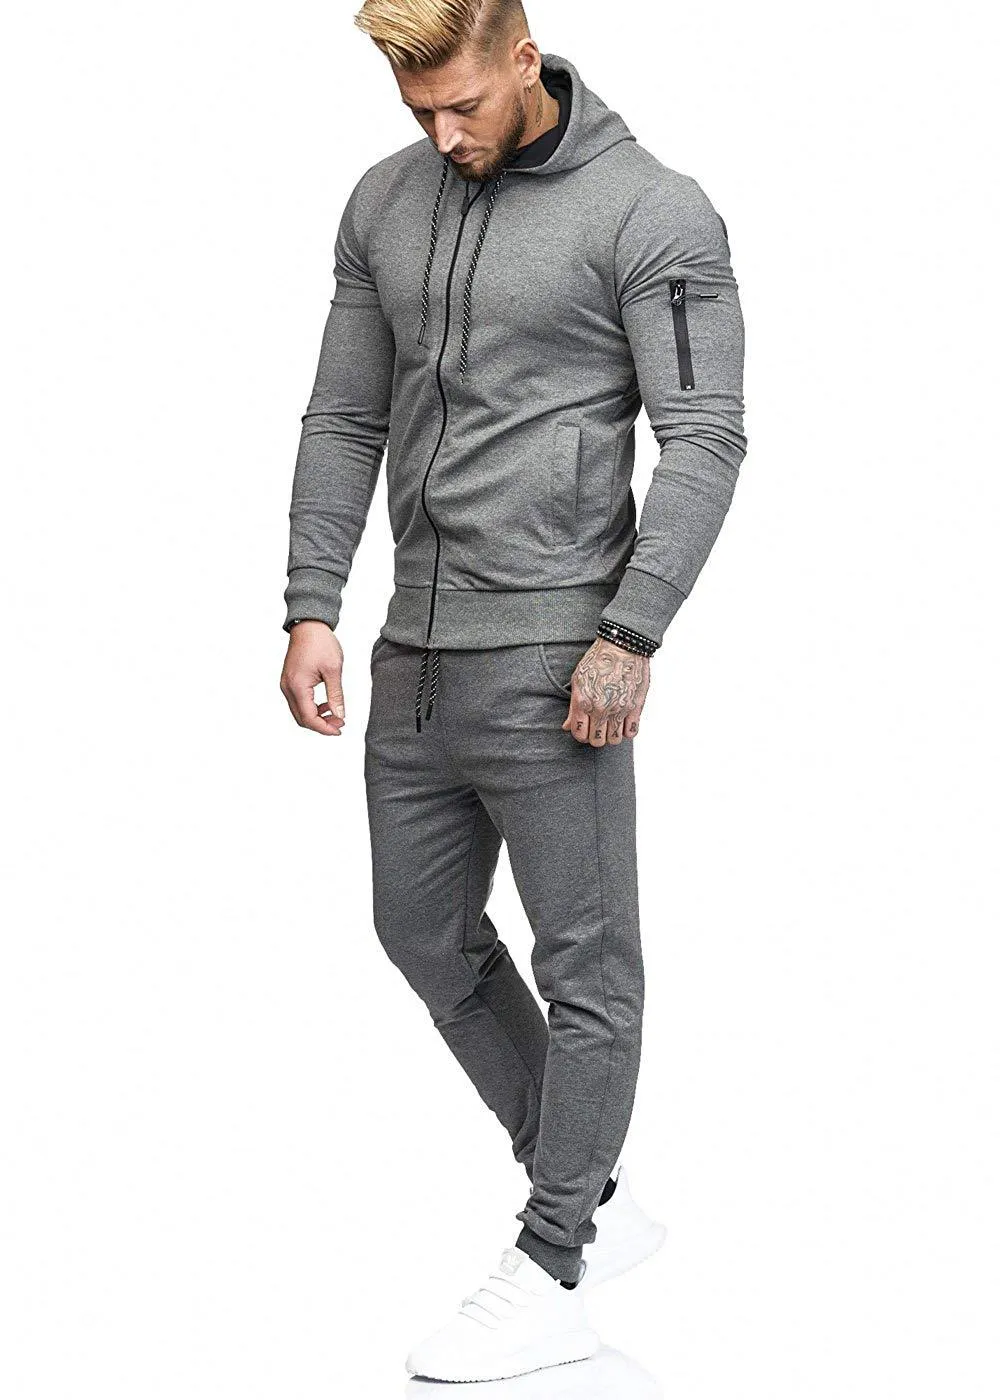 Mens Solid Color Designer Tracksuit Set  Mens Jogging Suits With  Sweatpants And Multiple Options From Designermenswear277, $25.69